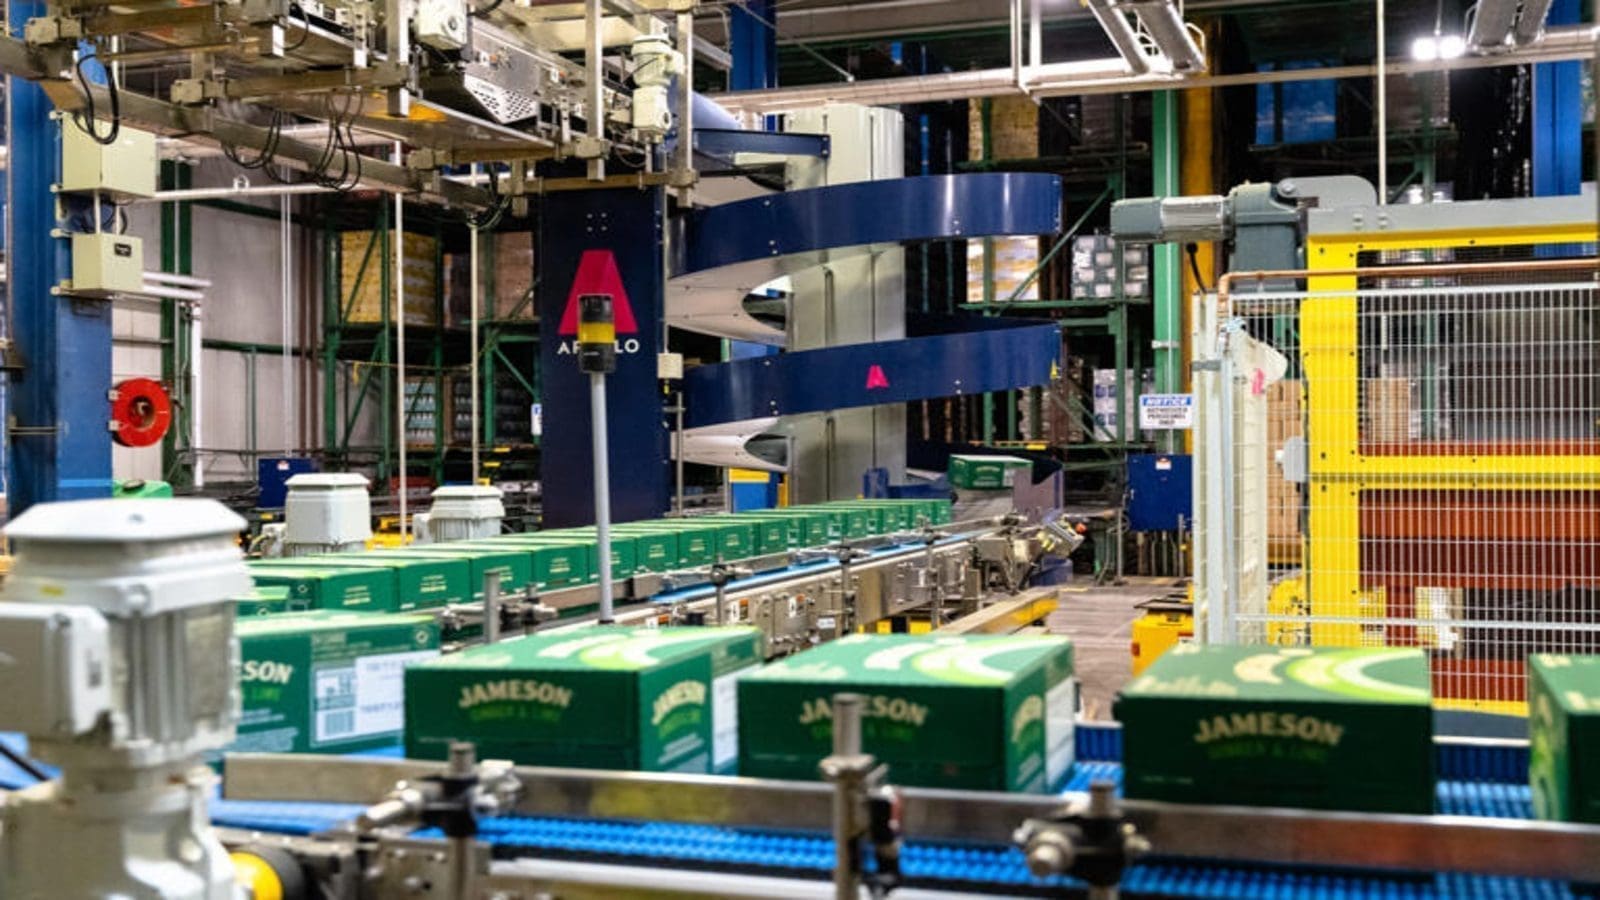 Pernod Ricard invest US$22m in RTD canning line, boosting capabilities and growth in RTD space